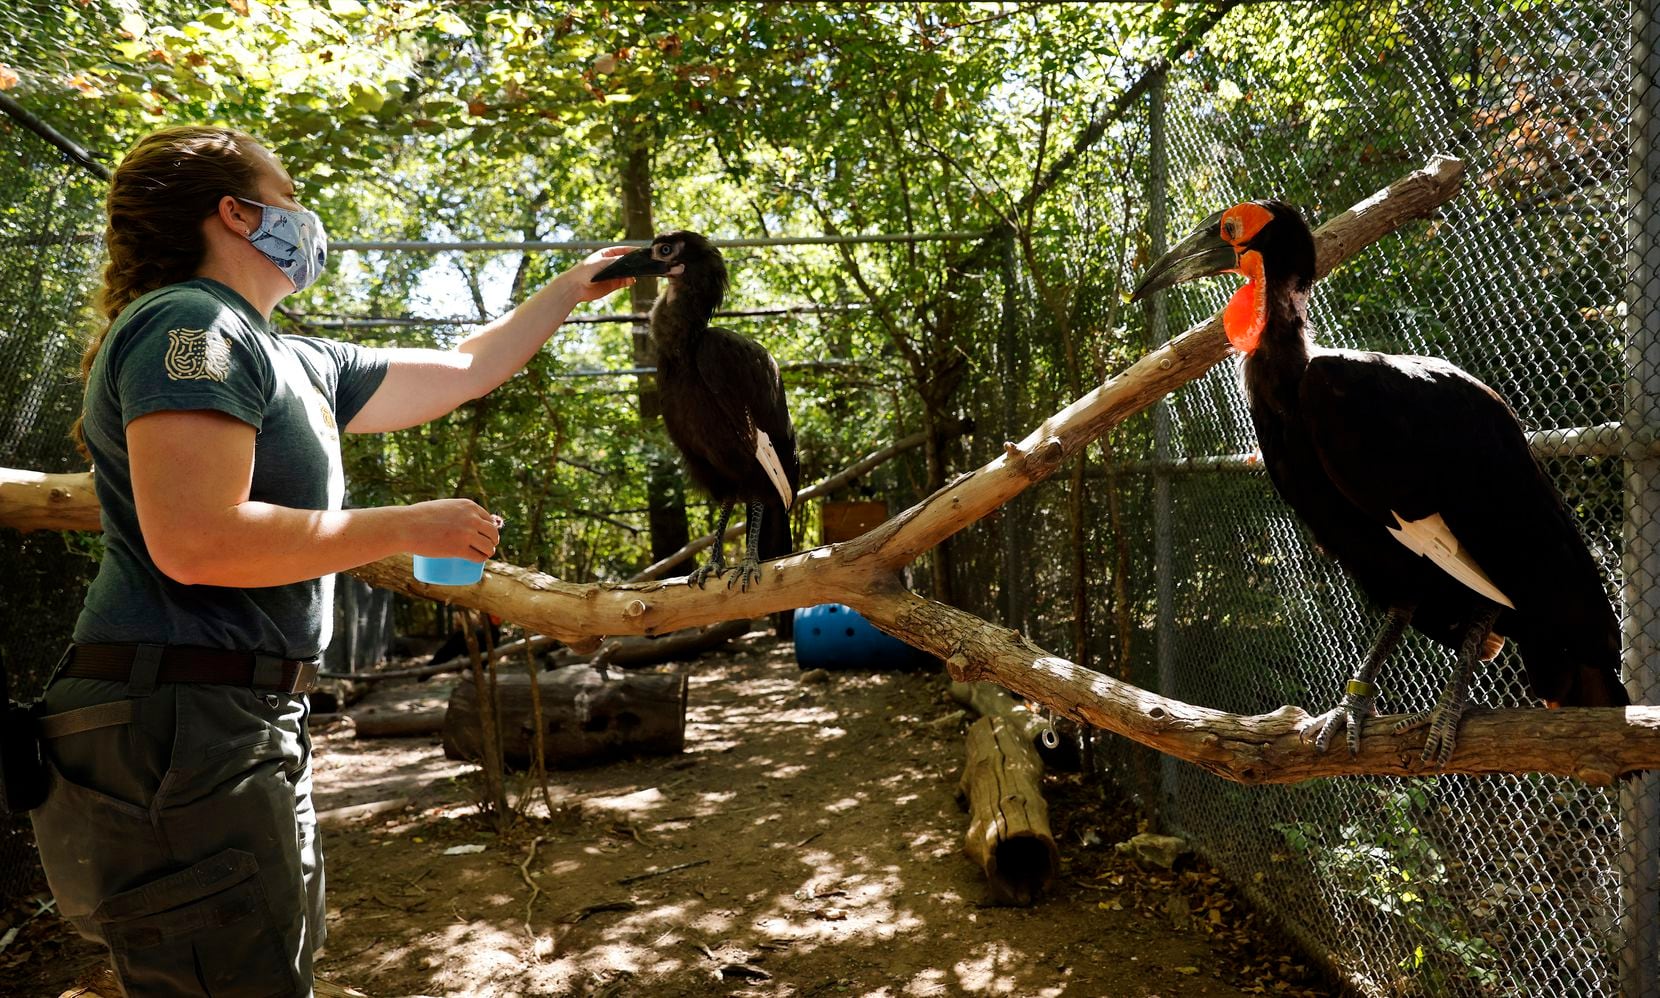 Ann Knutson, assistant zoological manager of birds, checked on Kune, a southern ground hornbill that hatched three months ago and lives with his family group, including 4-year-old Mosi (right), at the Dallas Zoo, Wednesday, September 22, 2021. Knutson flew the egg to Dallas and has been caring for the southern African bird since. The zoo has a family of four hornbills, and has raised six chicks behind the scenes since 2017. (Tom Fox/The Dallas Morning News)